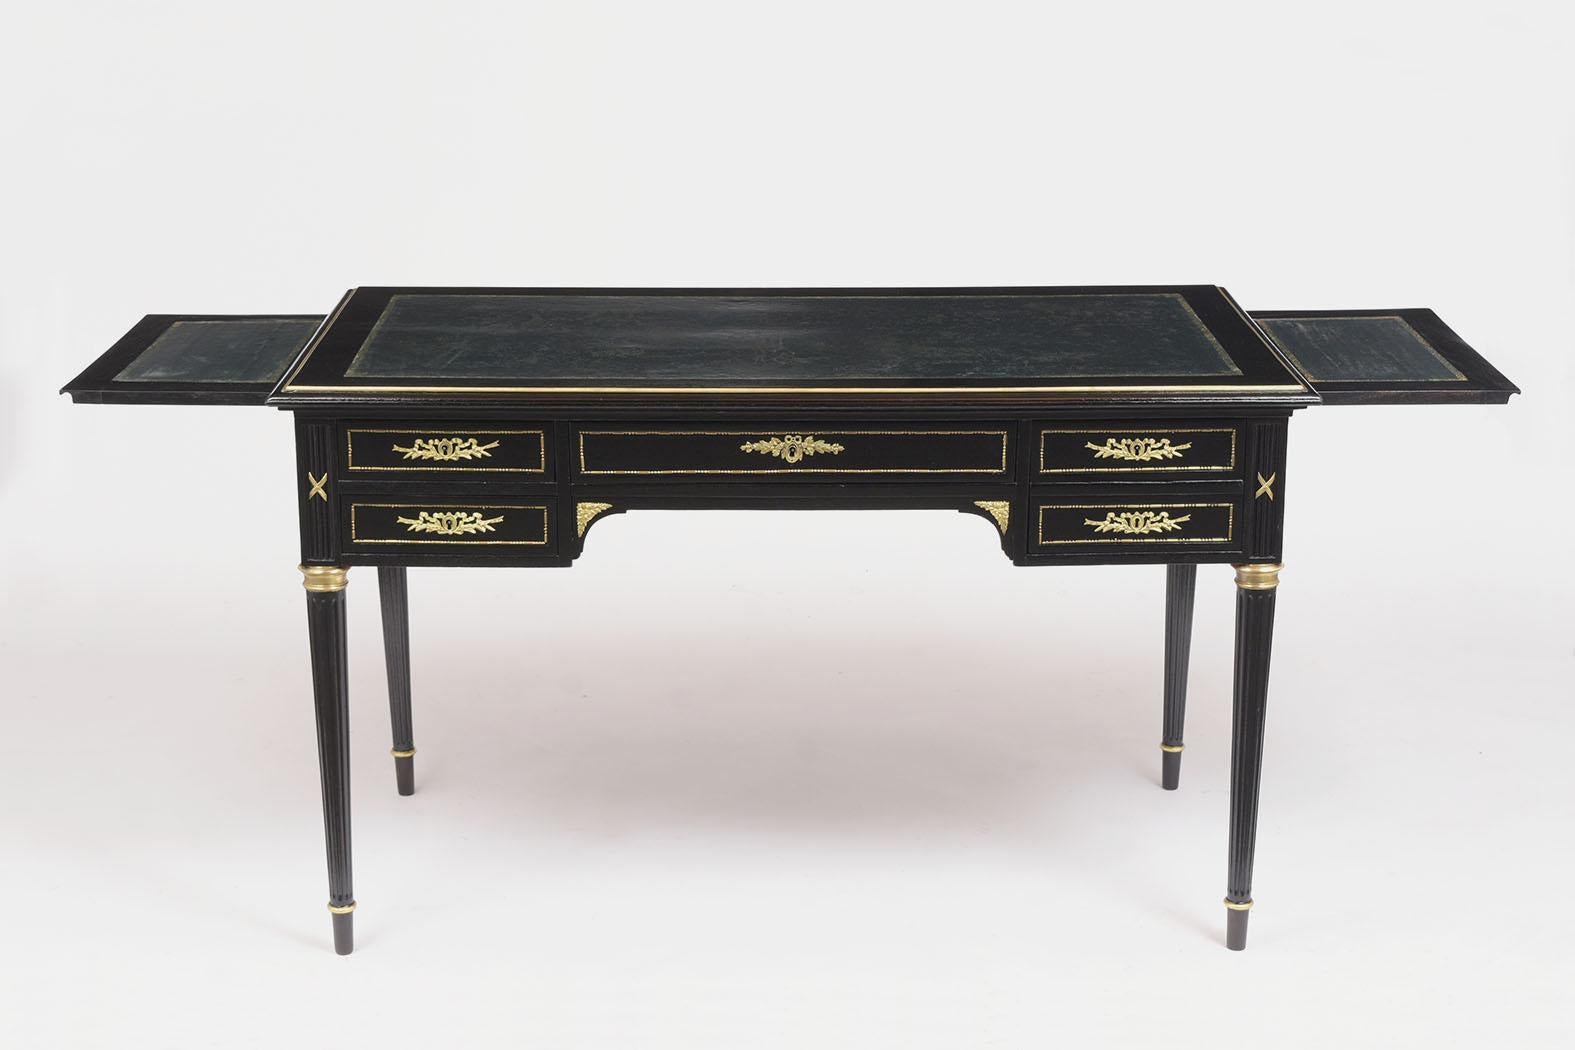 This 1880s Antique French Louis XVI-style desk is made of mahogany wood with a deep ebonized and lacquered finish. The top features the original embossed leather insert with gilt details. There are five drawers with brass molding and large key